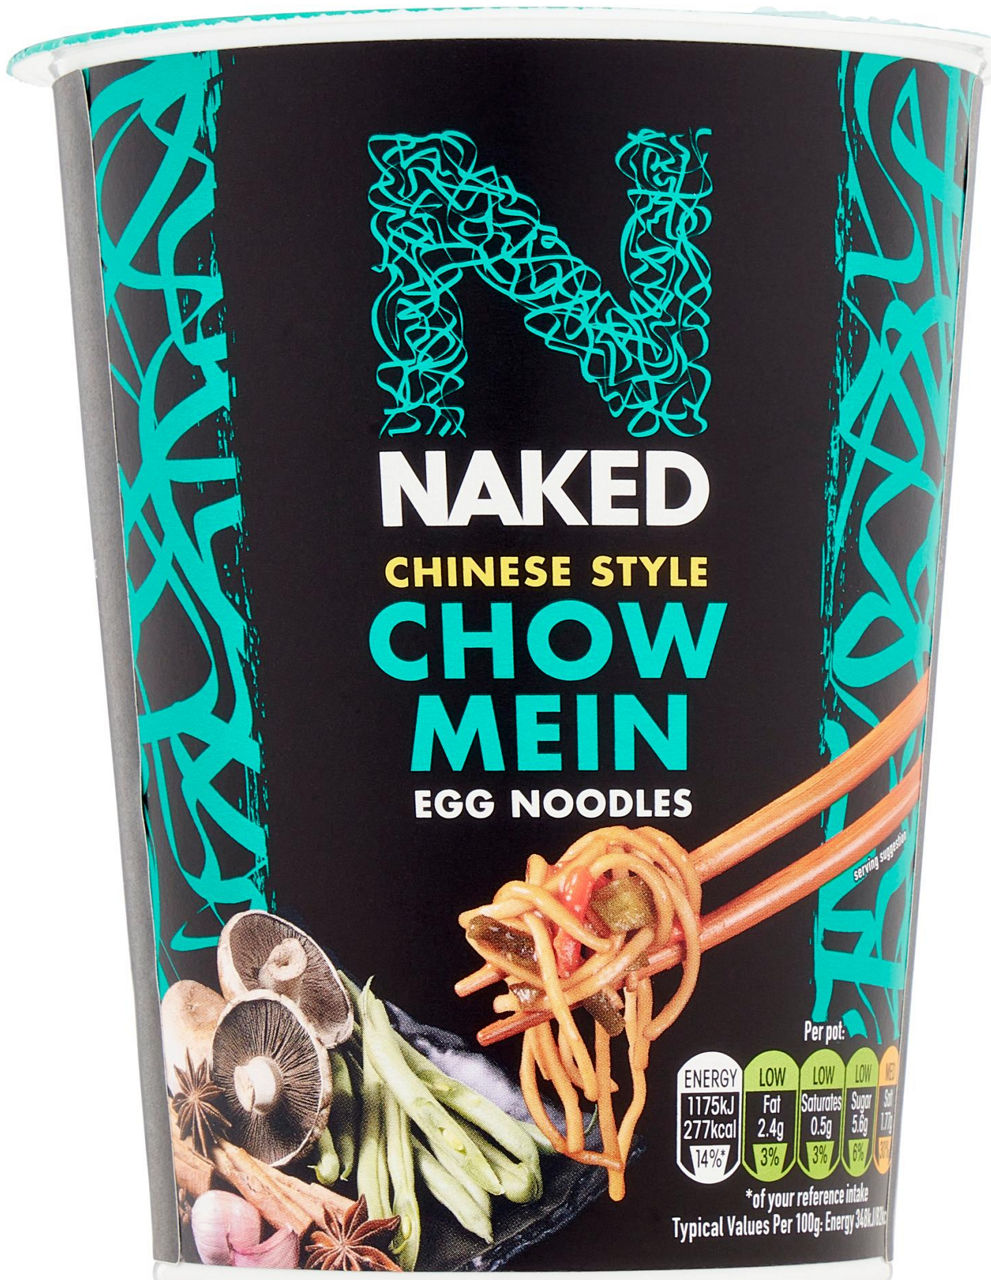 Noodles chinese style chow mein naked g78